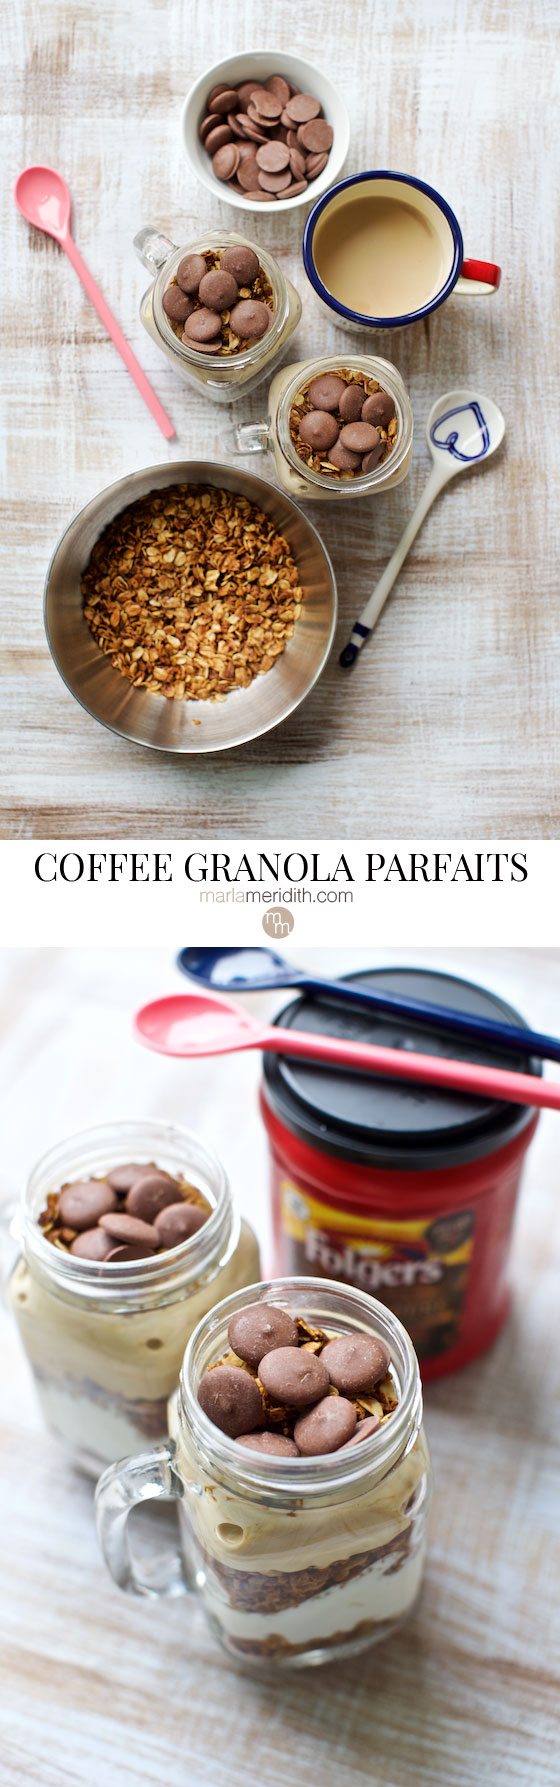 These COFFEE GRANOLA PARFAITS are the best part of waking up! Made with @Folgers AD MarlaMeridith.com ( @marlameridith )